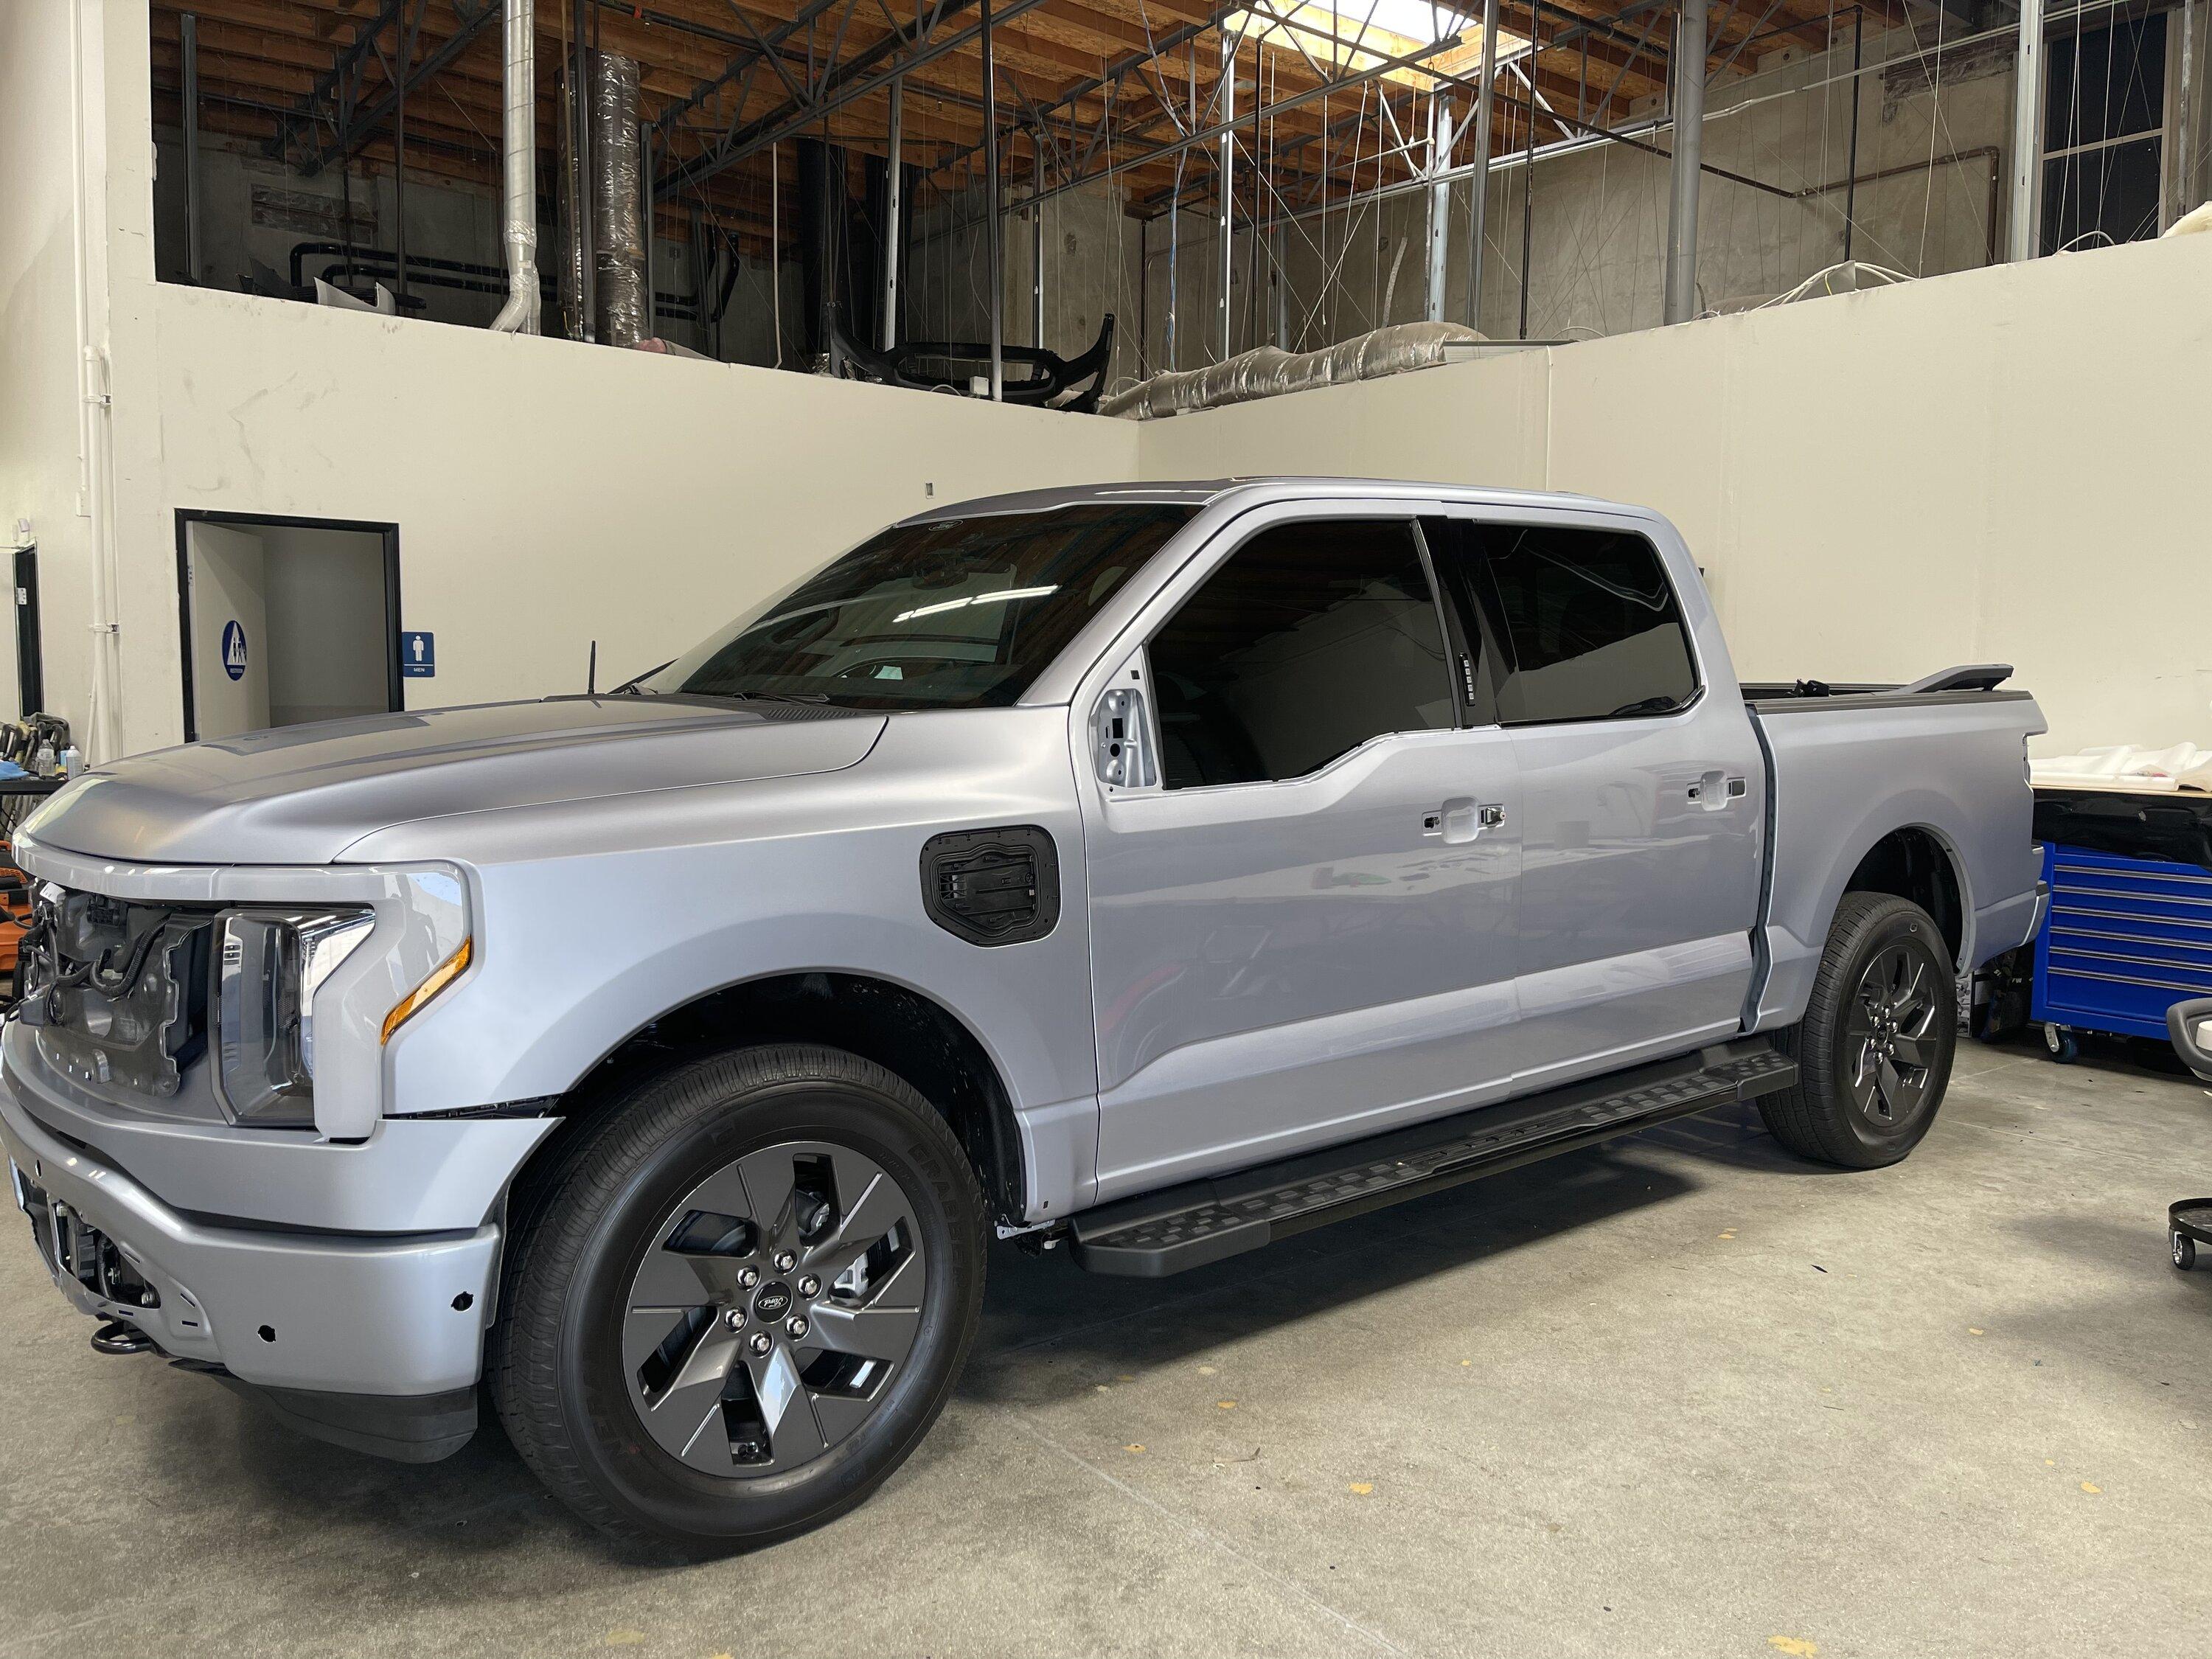 Ford F-150 Lightning Iced Blue Silver Lightning Build. Mods: PPF matte finish, Line-X, gloss black painted grille, black wrapped roof, wheels FED2C3CB-CE2C-4D9E-8132-AEA8D97FF87A